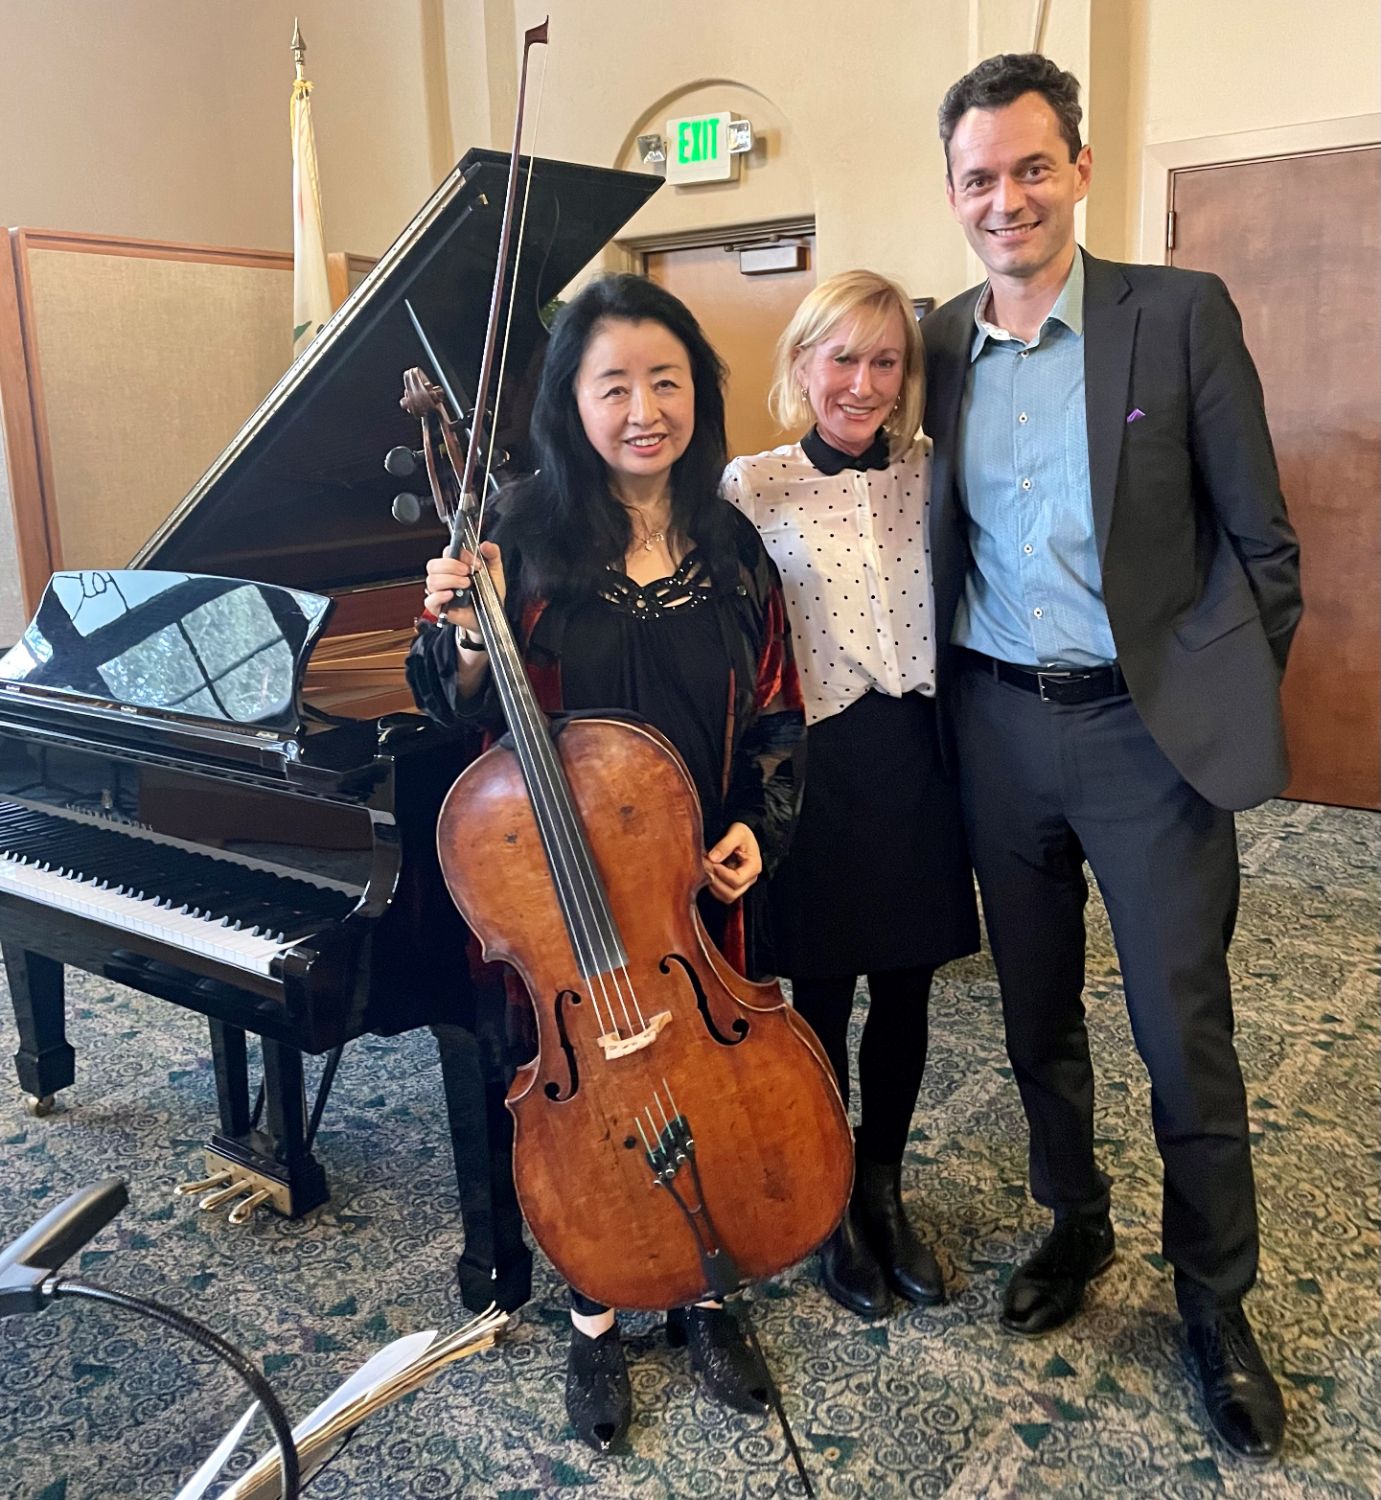 PHOTO: provided by Friends of South Pasadena Library | The South Pasadenan | Cellist Cecilia Tsan and pianist Steven Vanhauwaert pictured with composer Nan Schwartz.